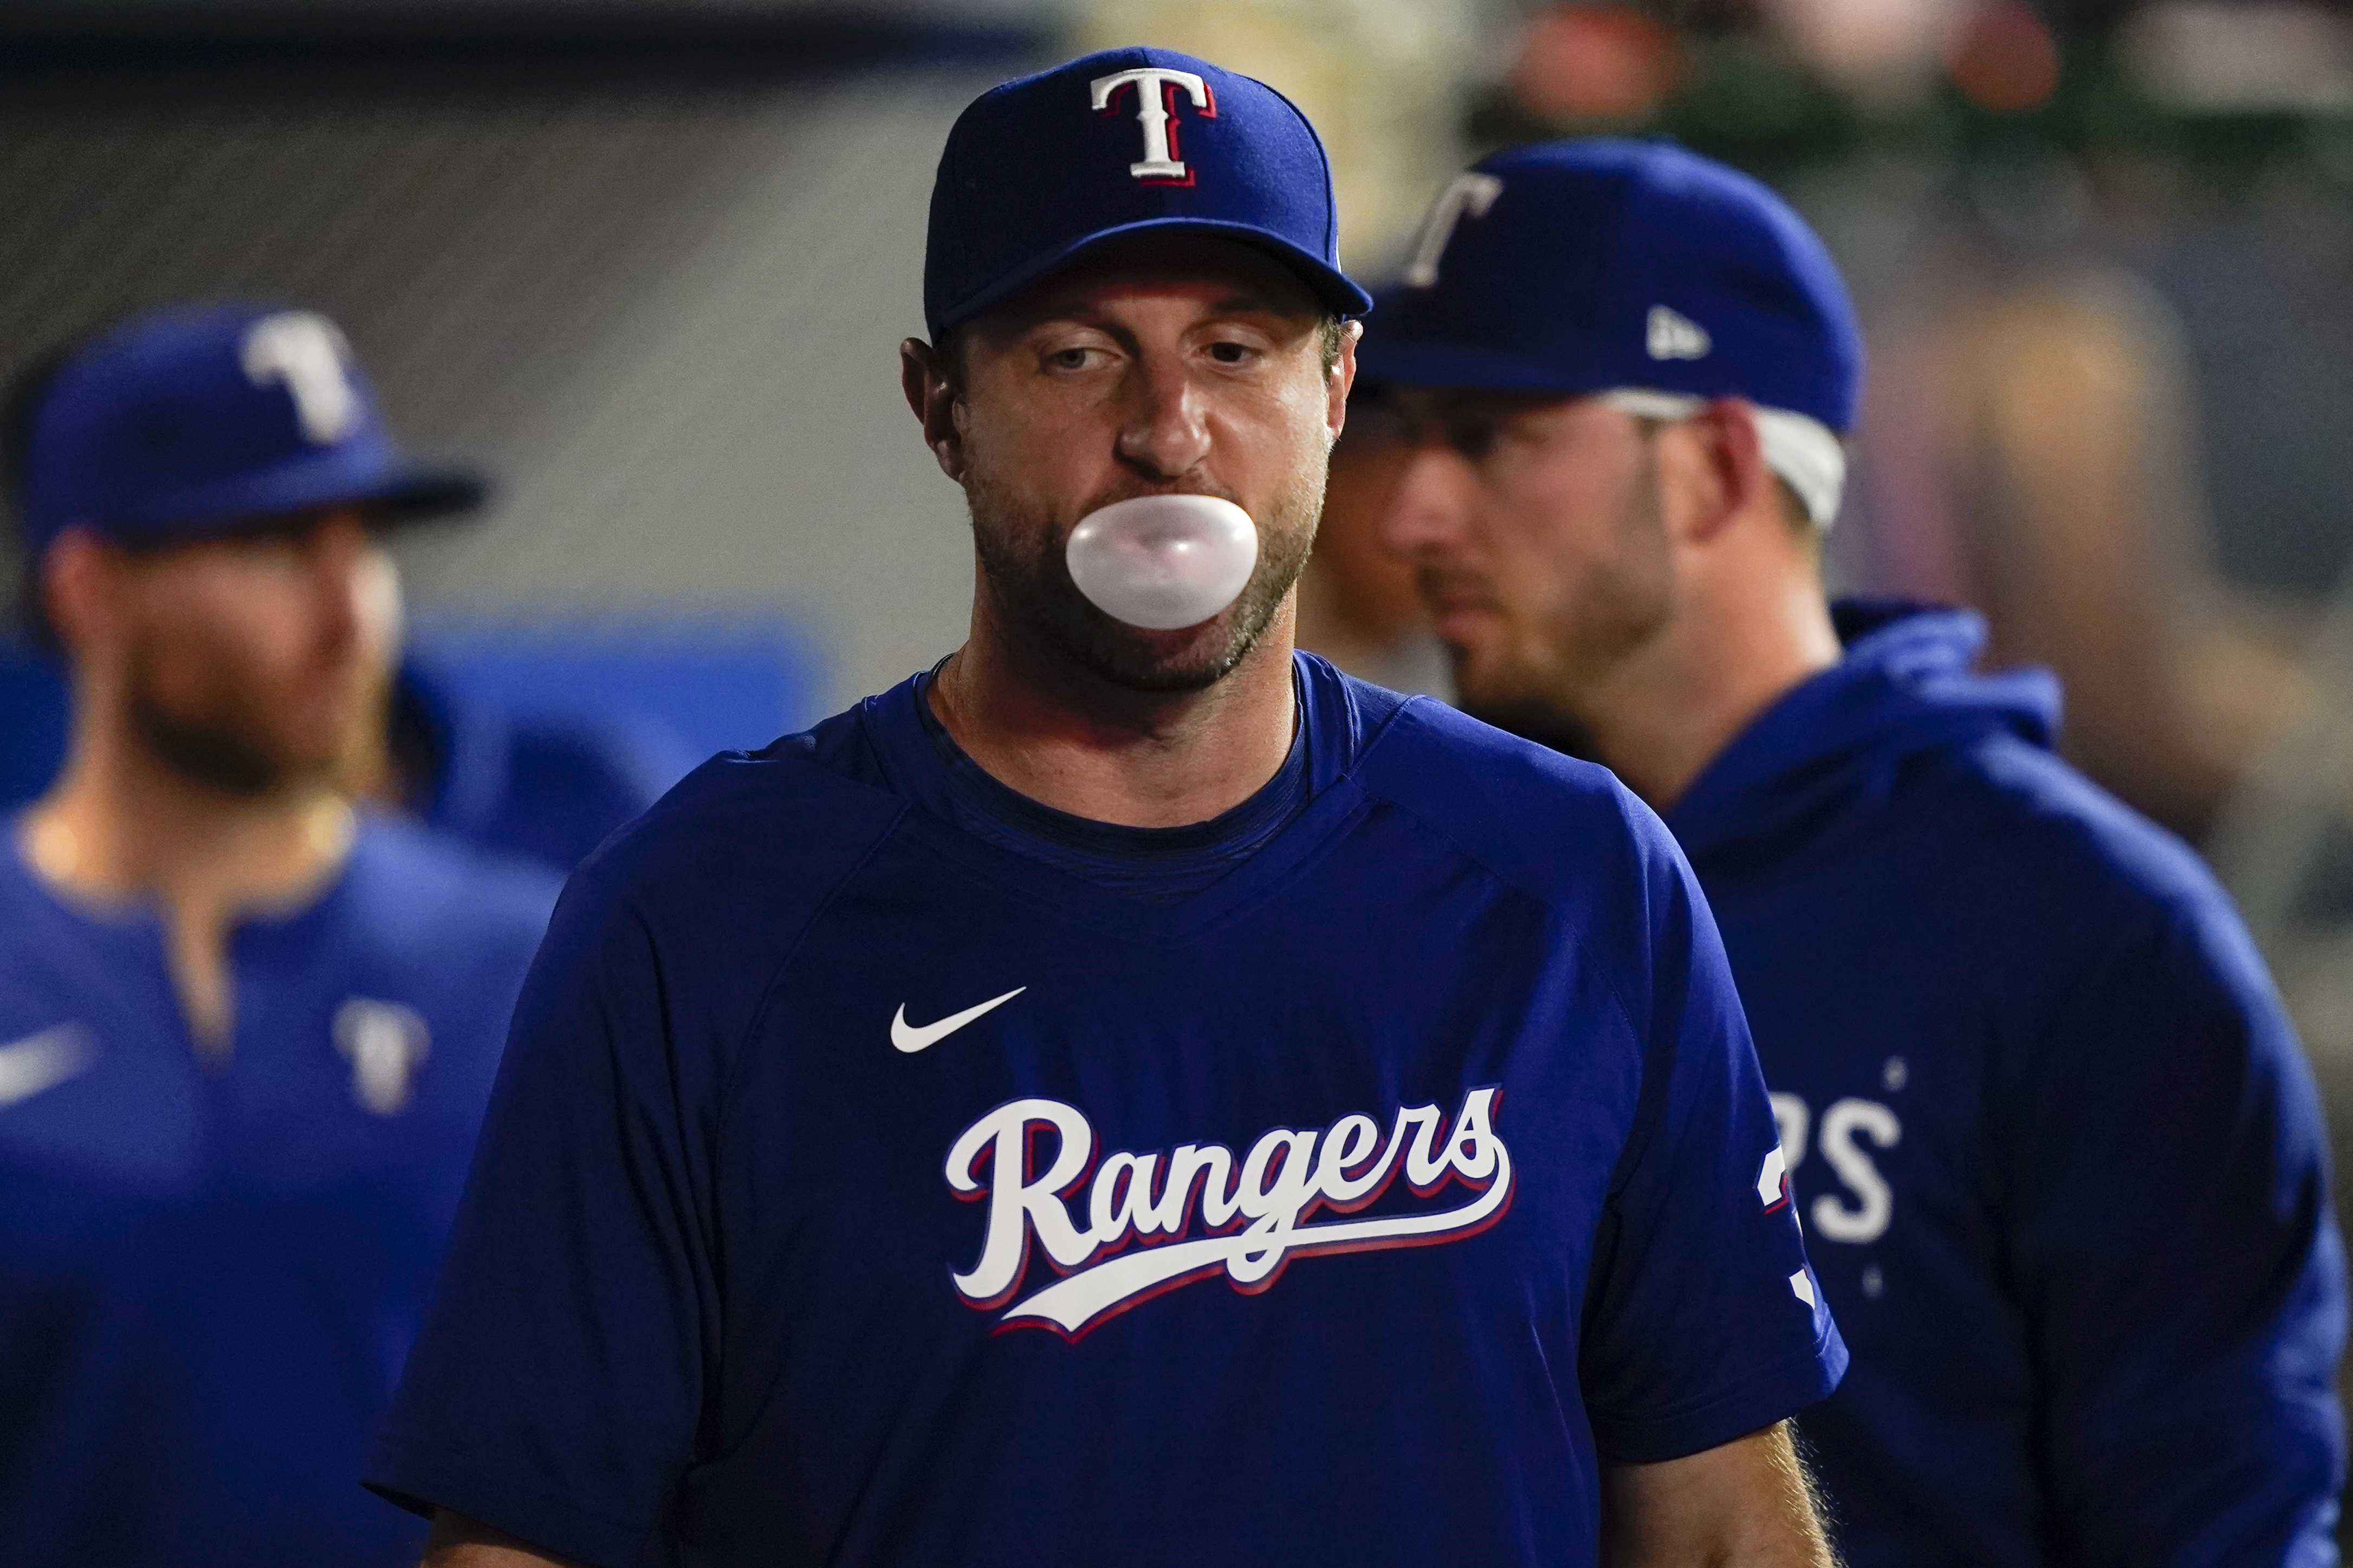 Texas Rangers: Life is Just Practice for Baseball Uniform/Jersey